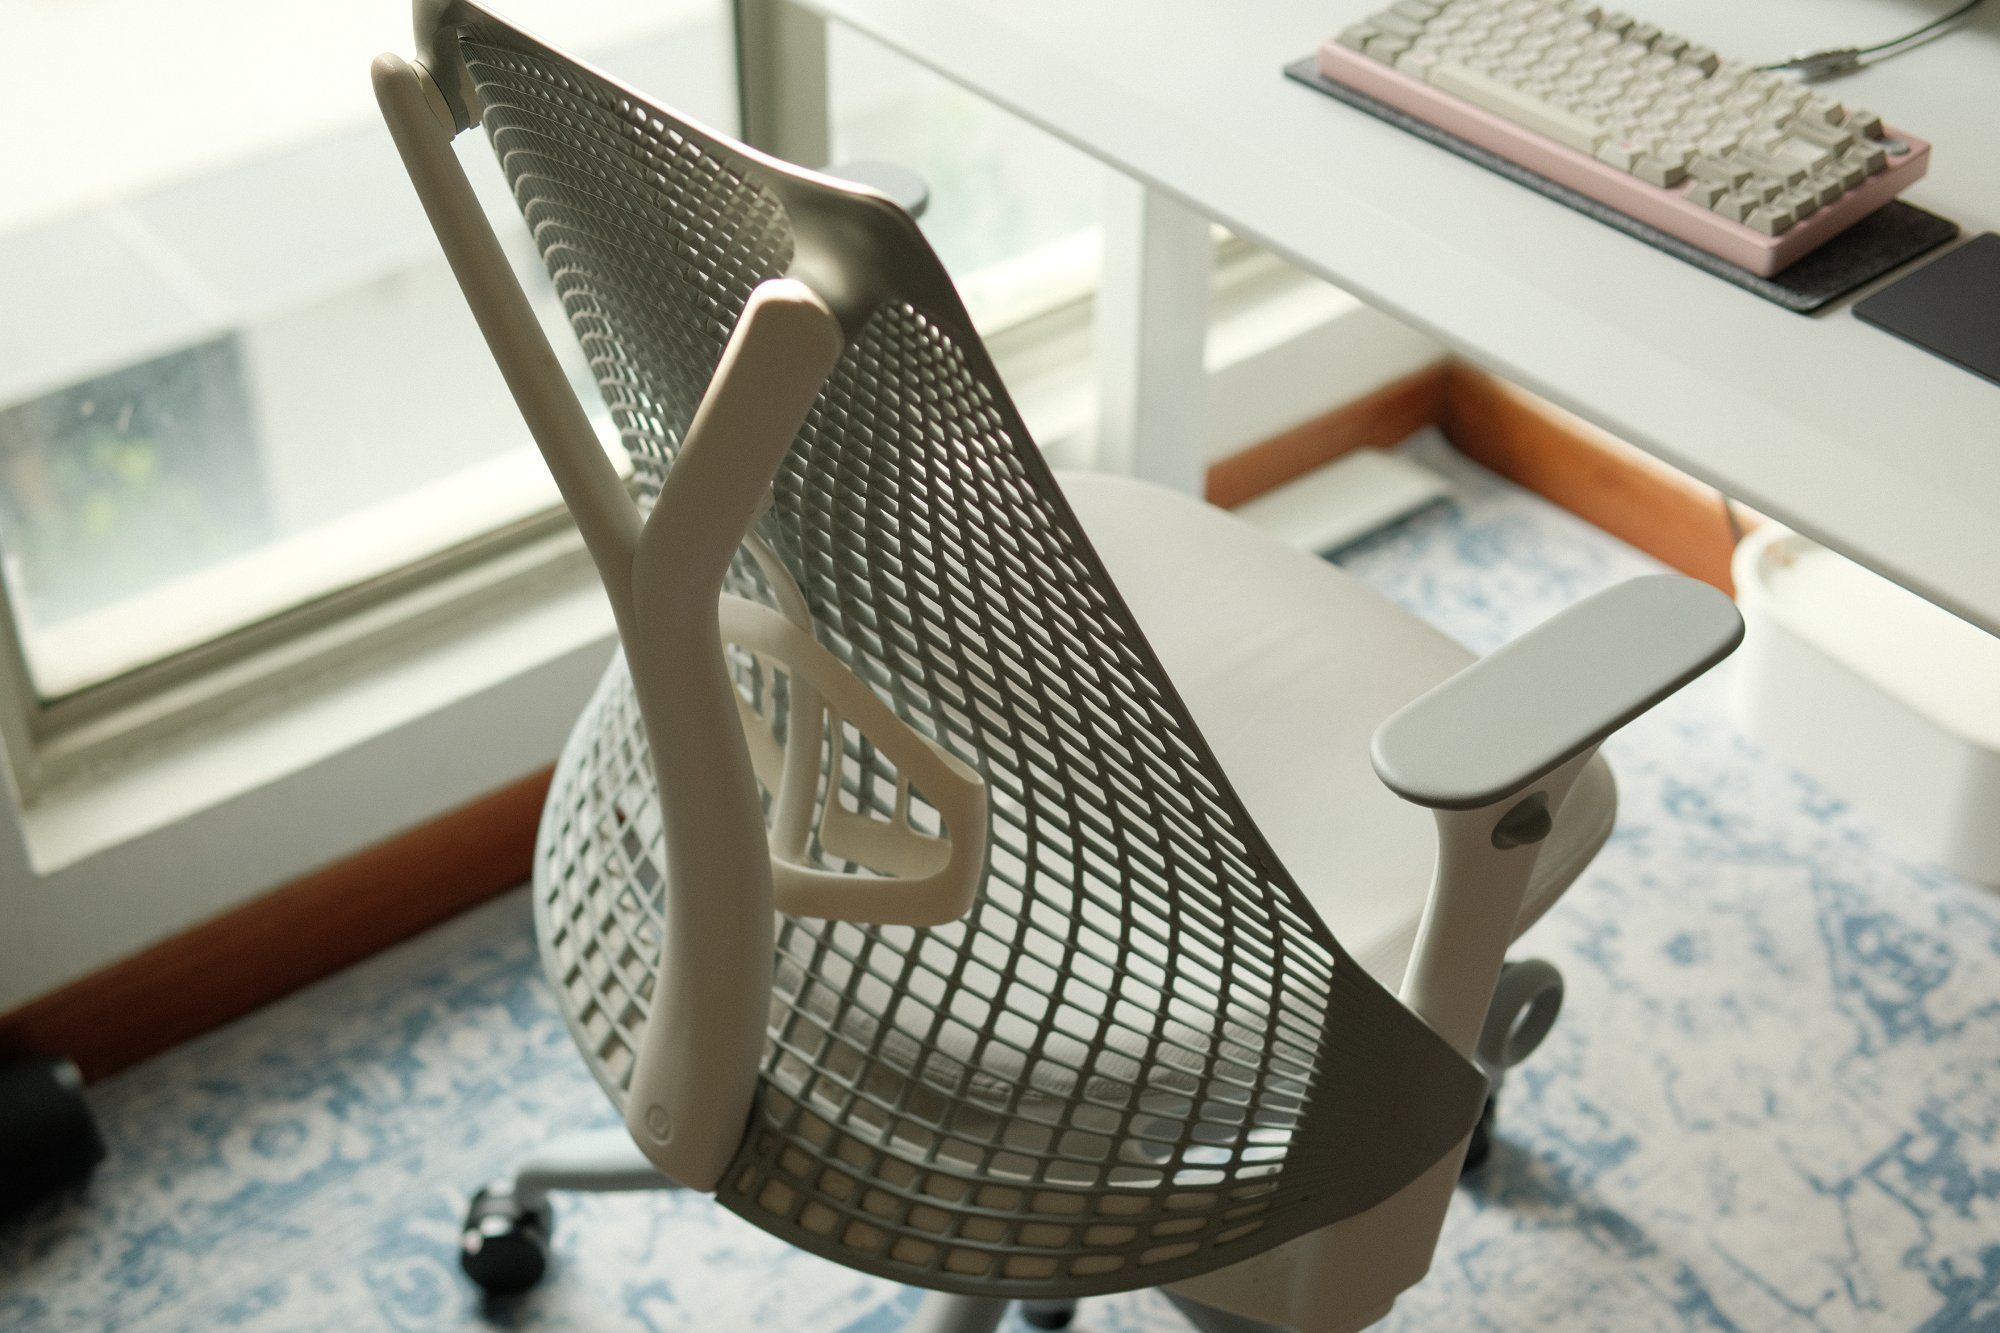 A Herman Miller Sayl chair in a home office